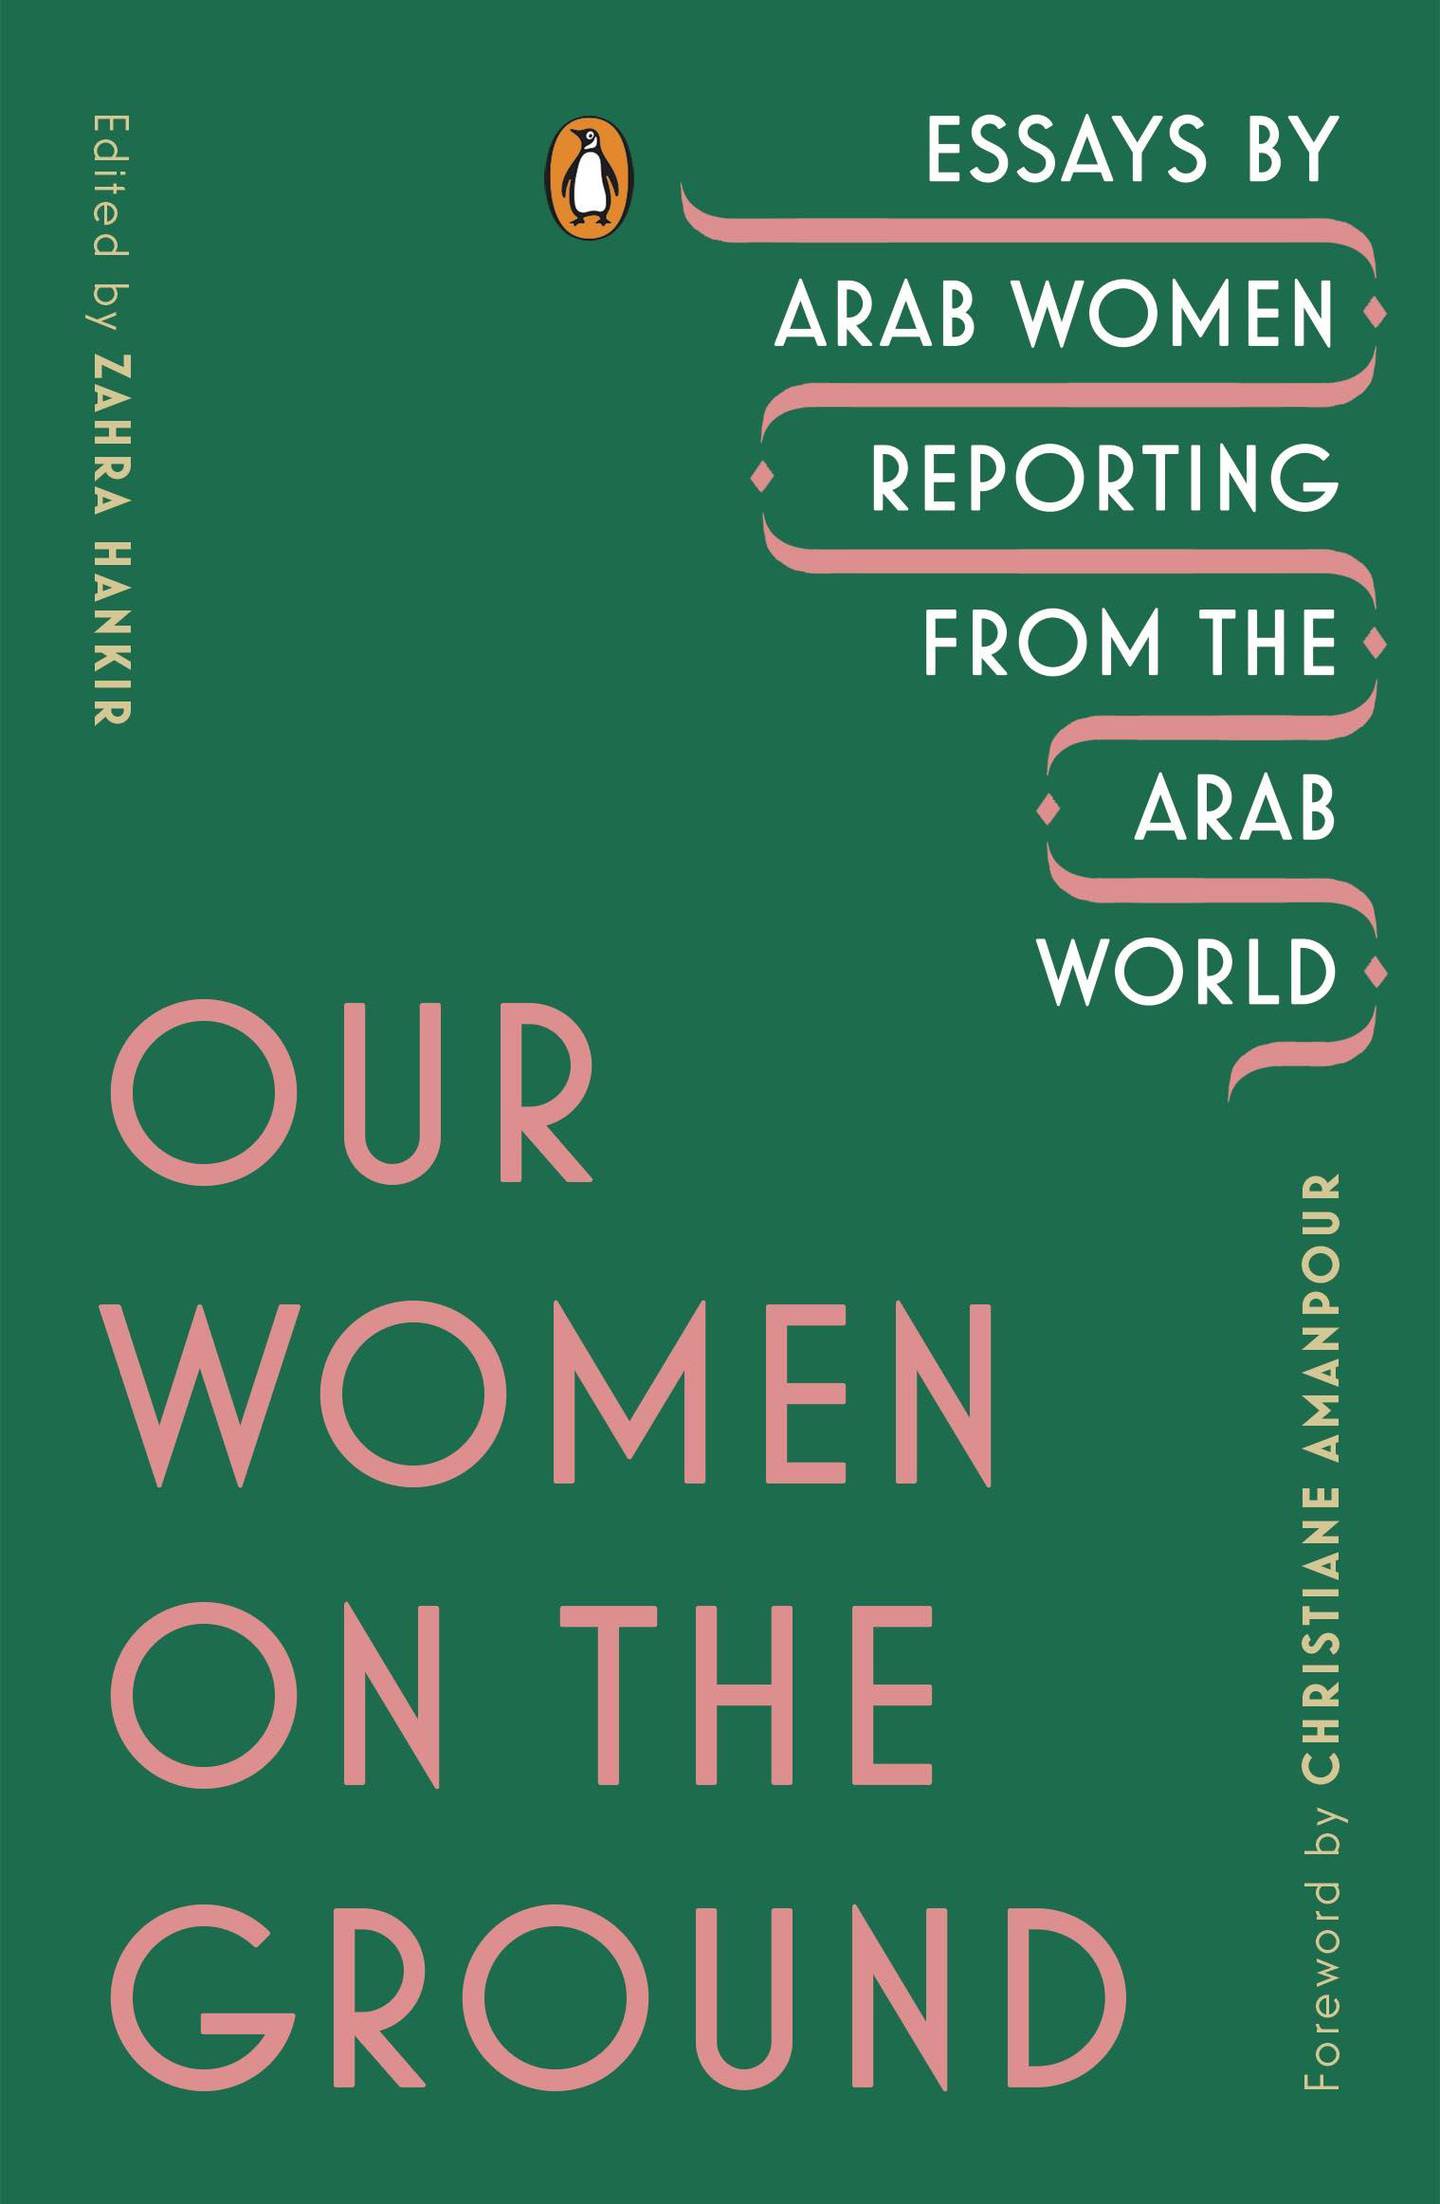 Our Women on the Ground, edited by Zahra Hankir, translations by Mariam Antar, published by Penguin Books. Courtesy Penguin Random House